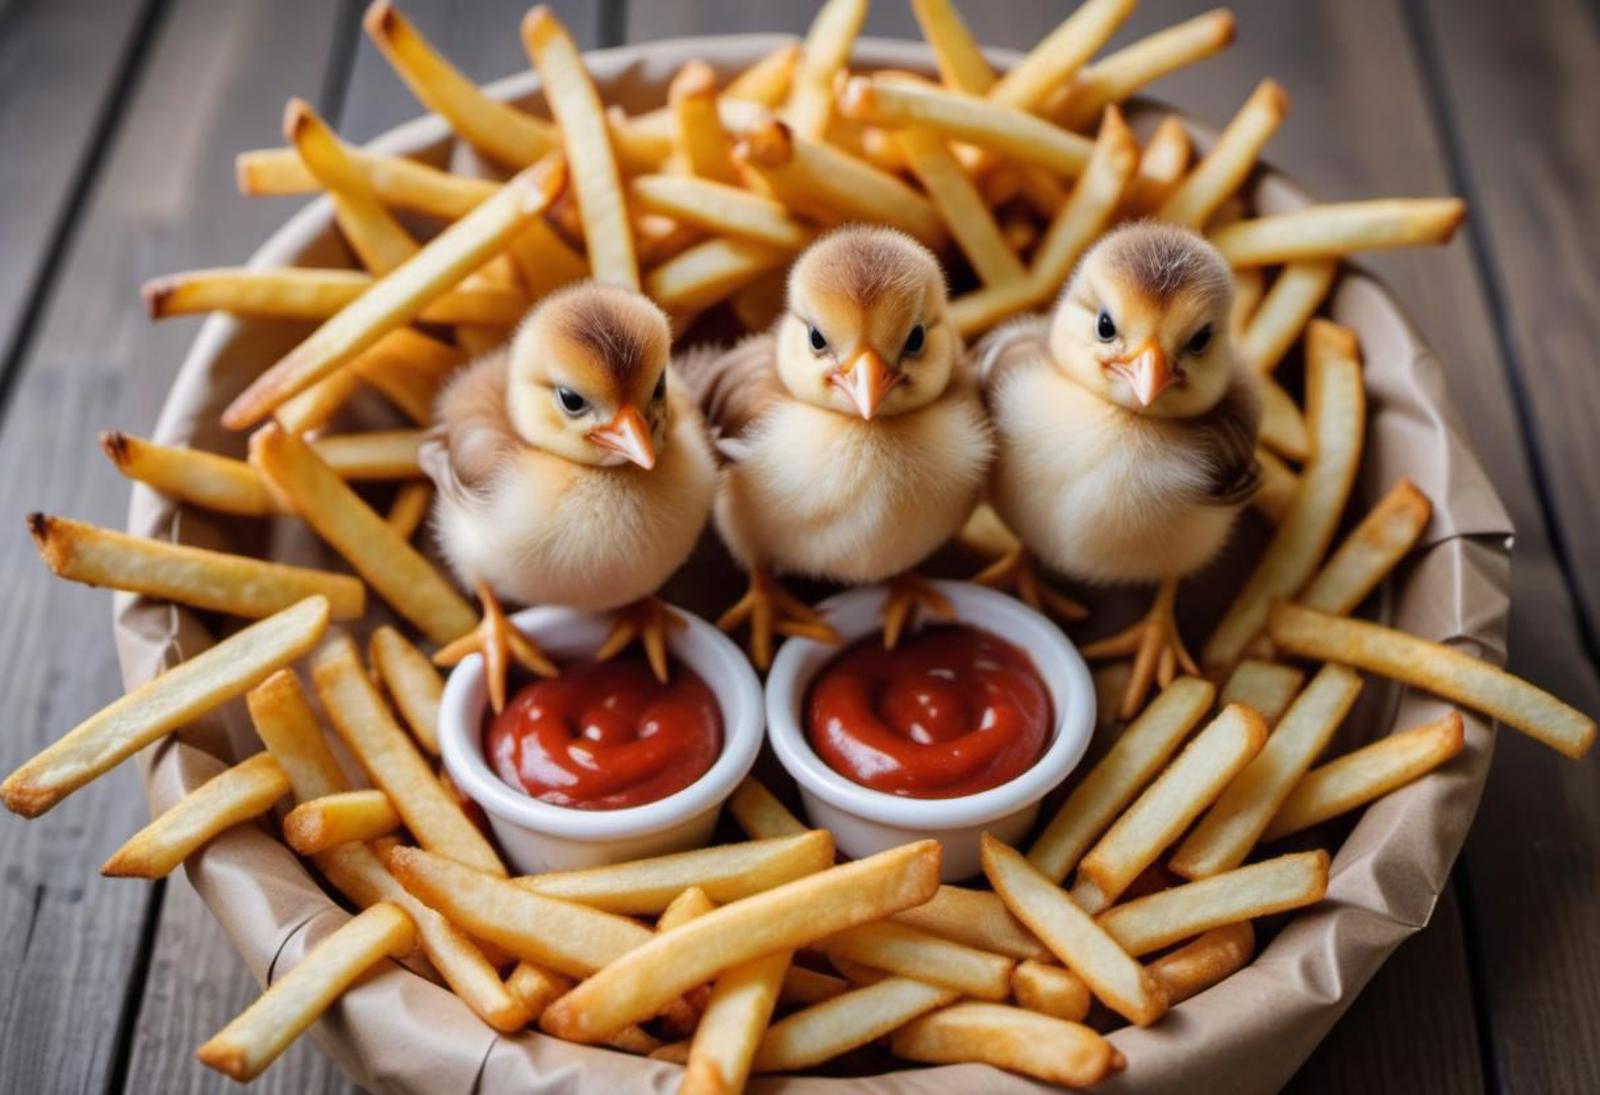 A bowl of fries with two baby chicks sitting on top and two ketchup cups.